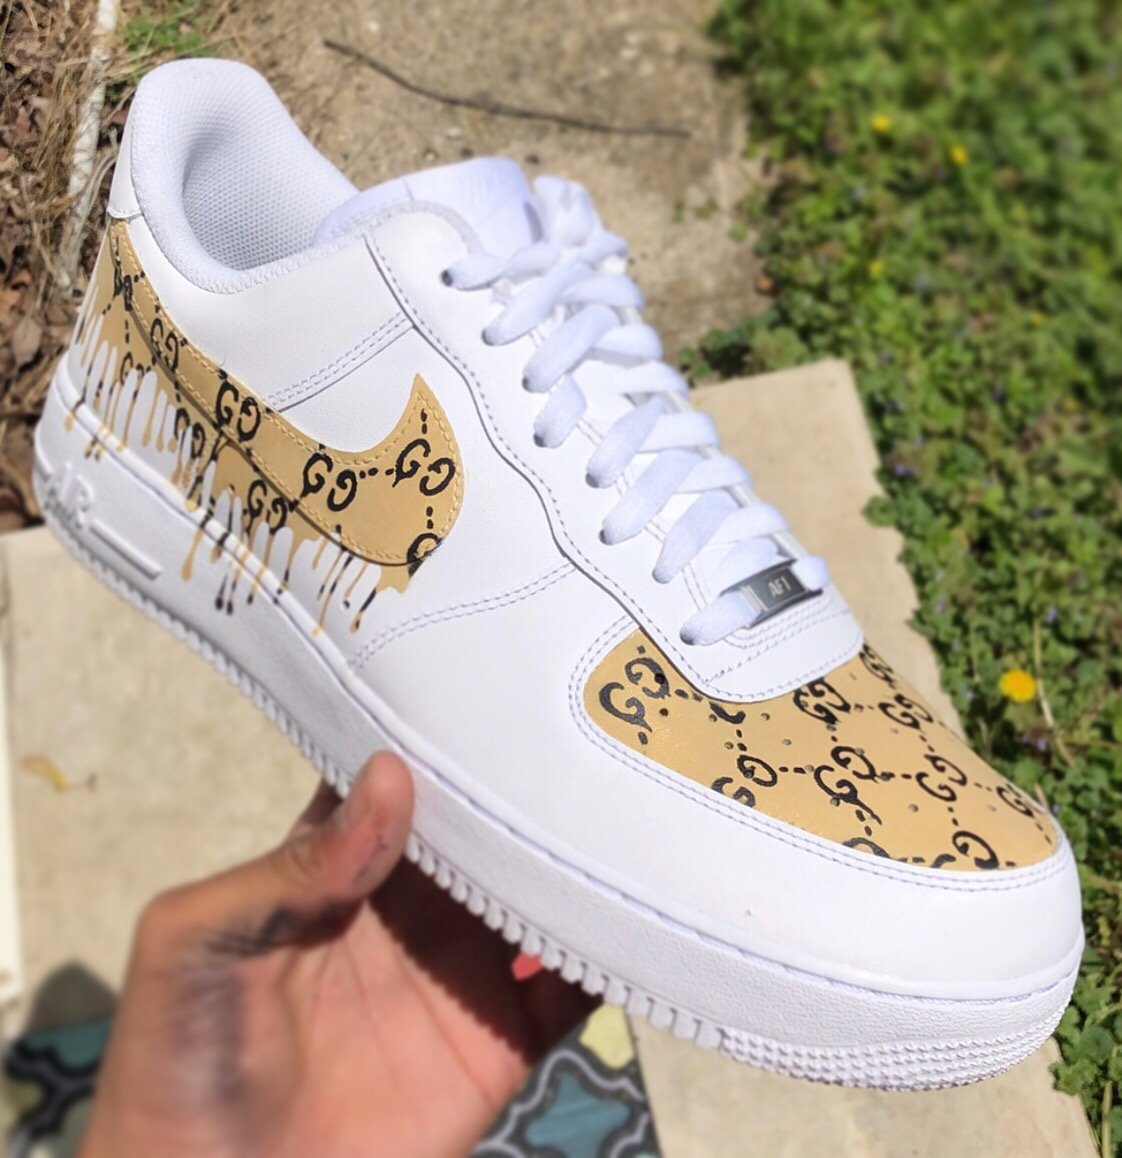 air force 1 with gucci